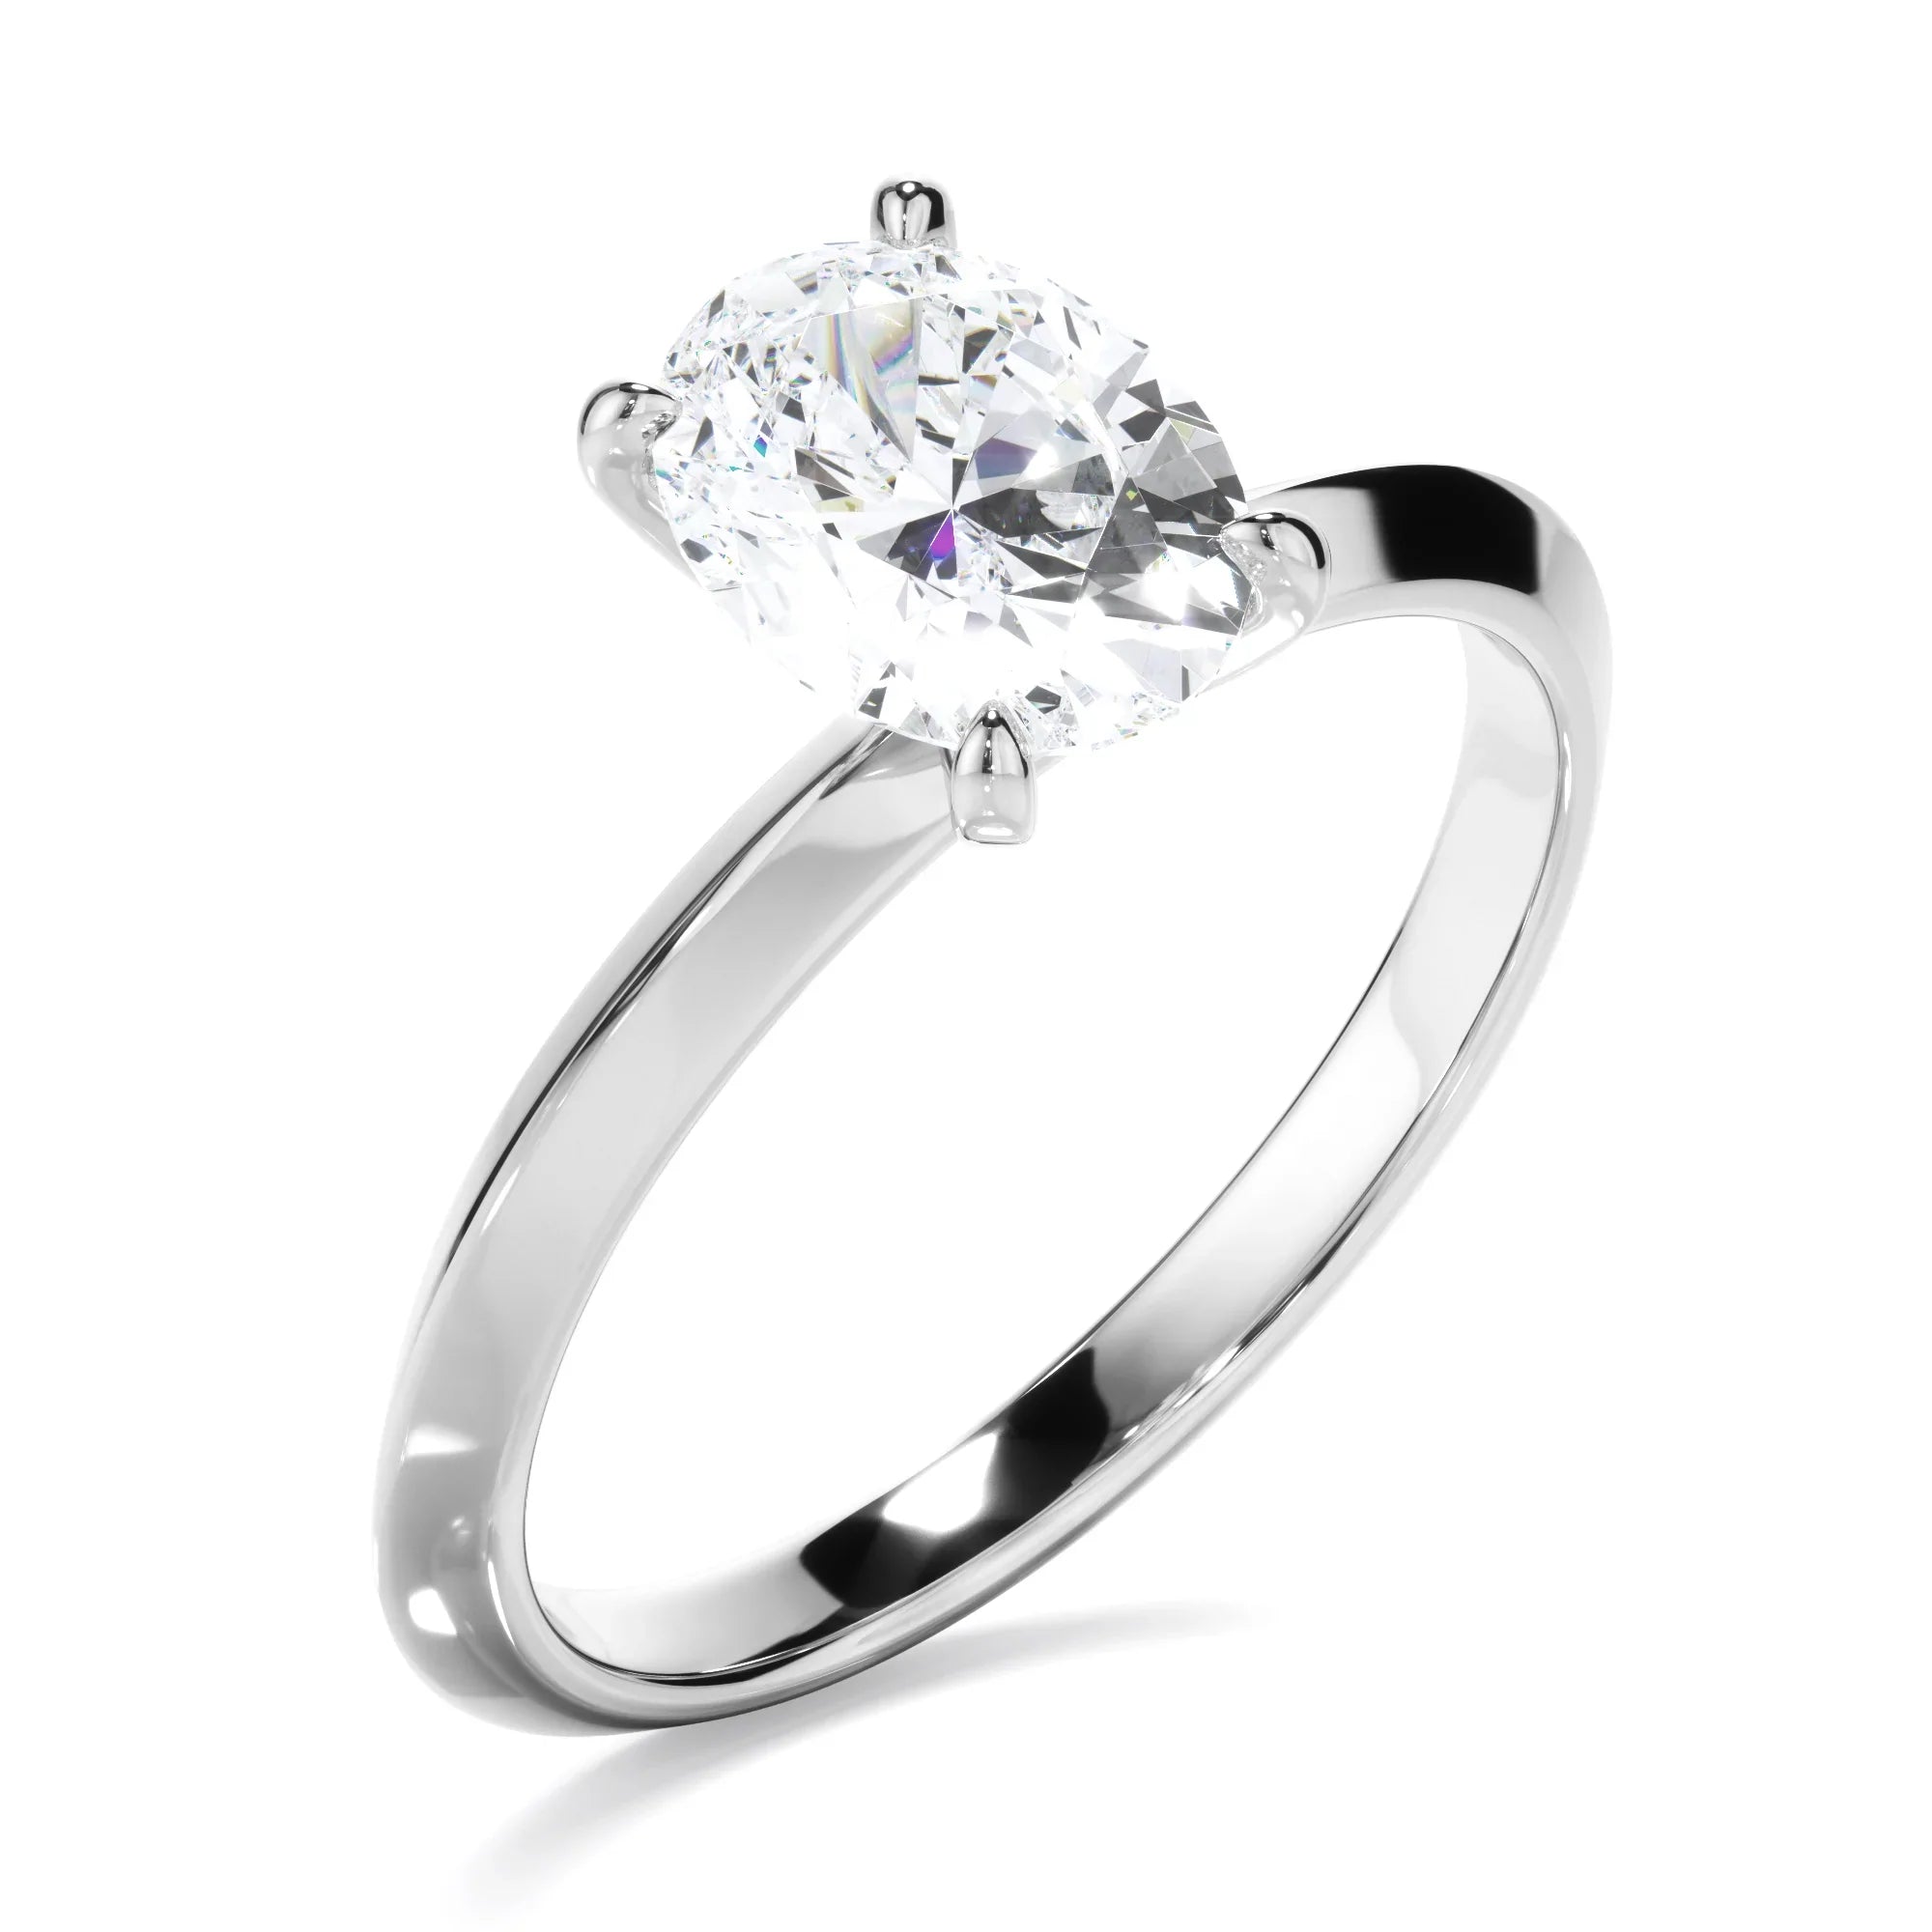 Oval Cut Diamond Solitaire Knife Edge Engagement Ring